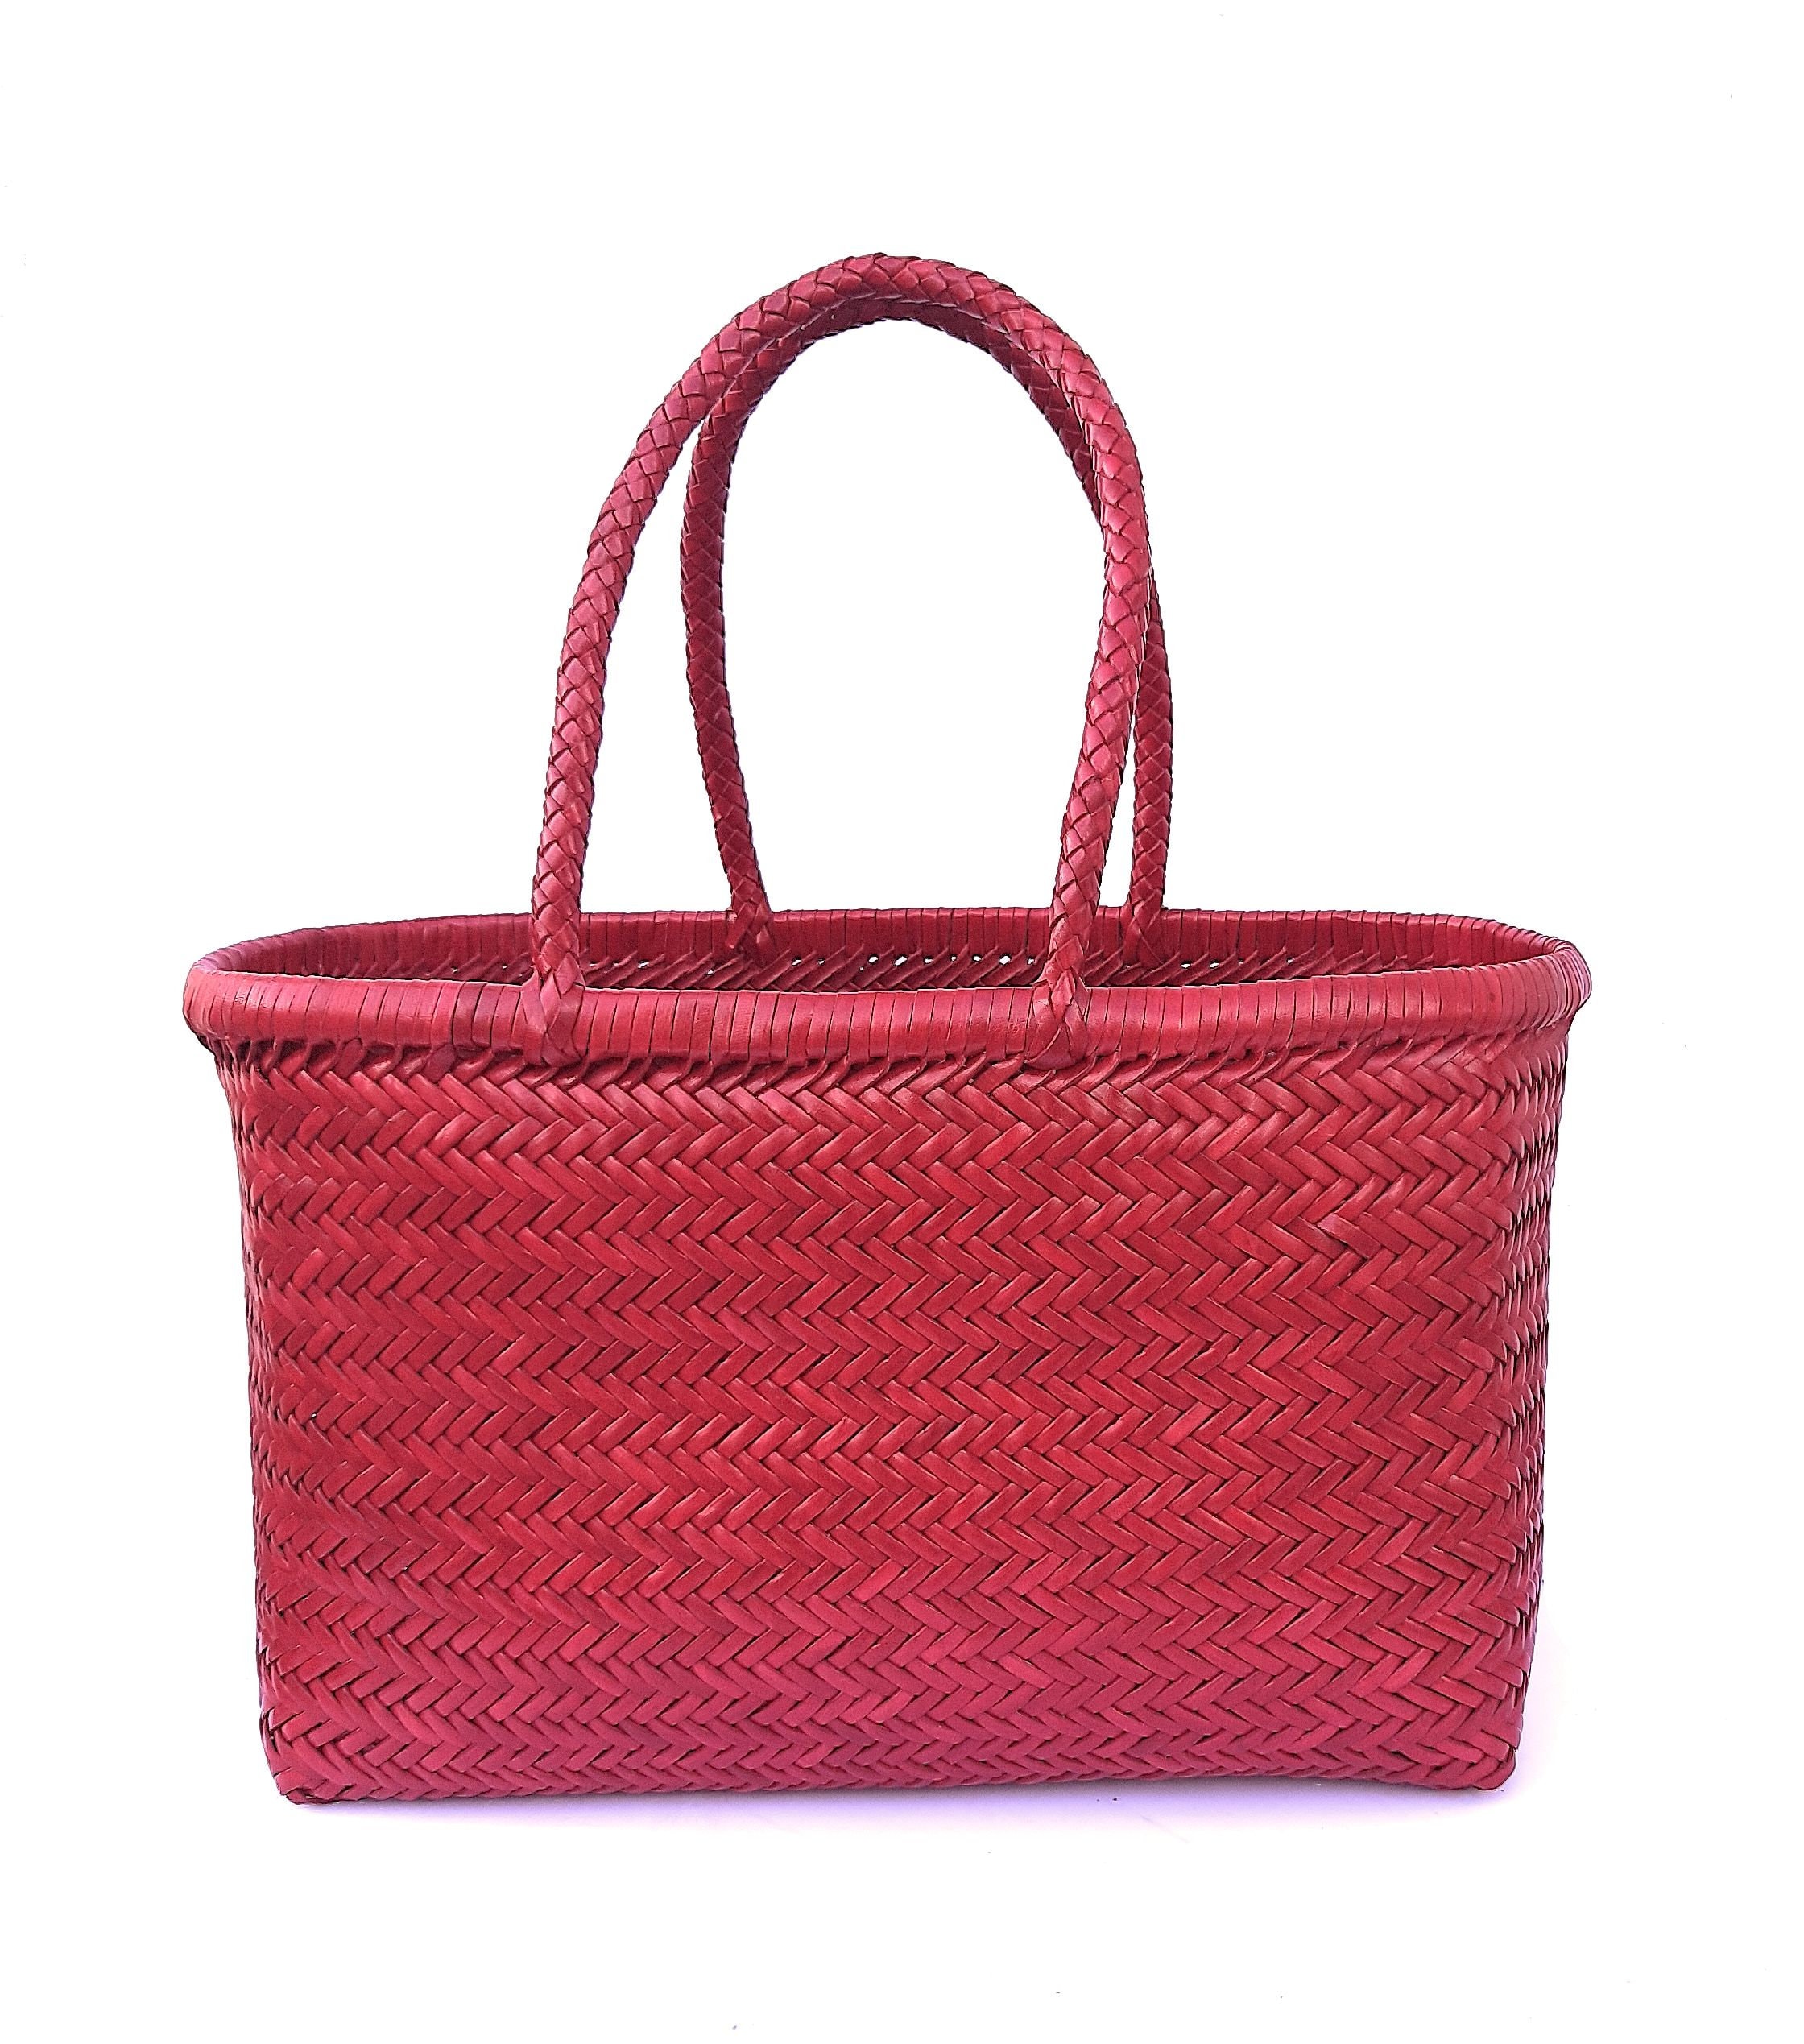 ALTICA Genuine Leather Hand Woven Bamboo Style Ladies Tote Bag - Monalisa